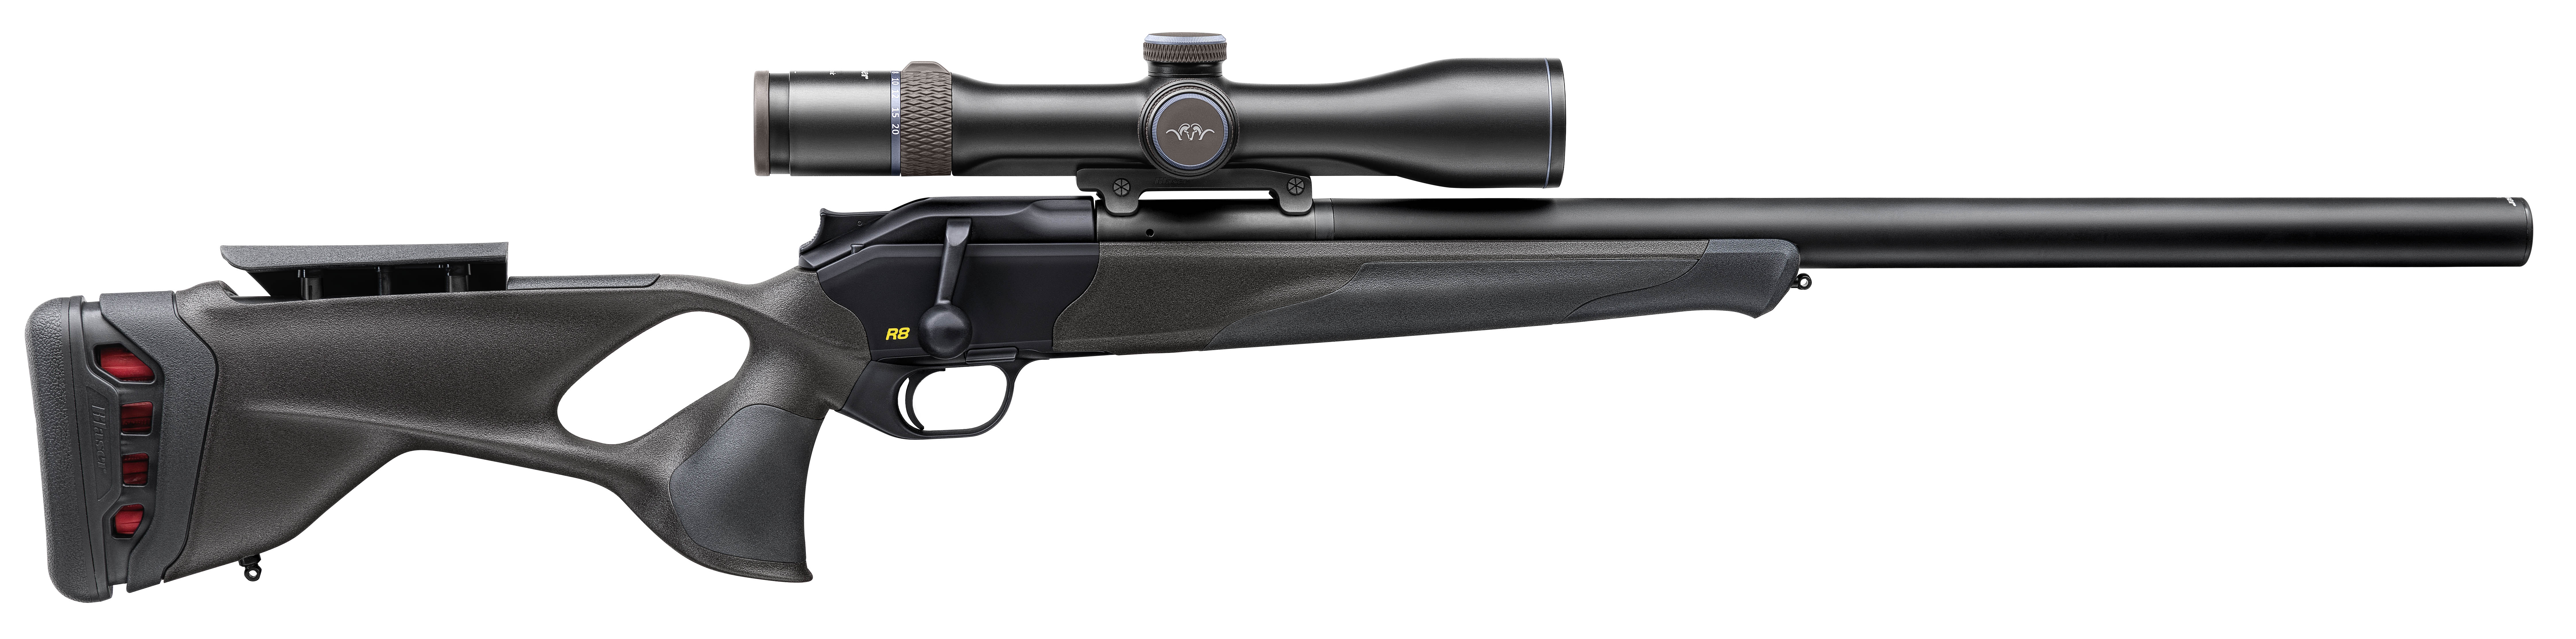 [Translate to Englisch:] Blaser R8 ULTIMATE SILENCE